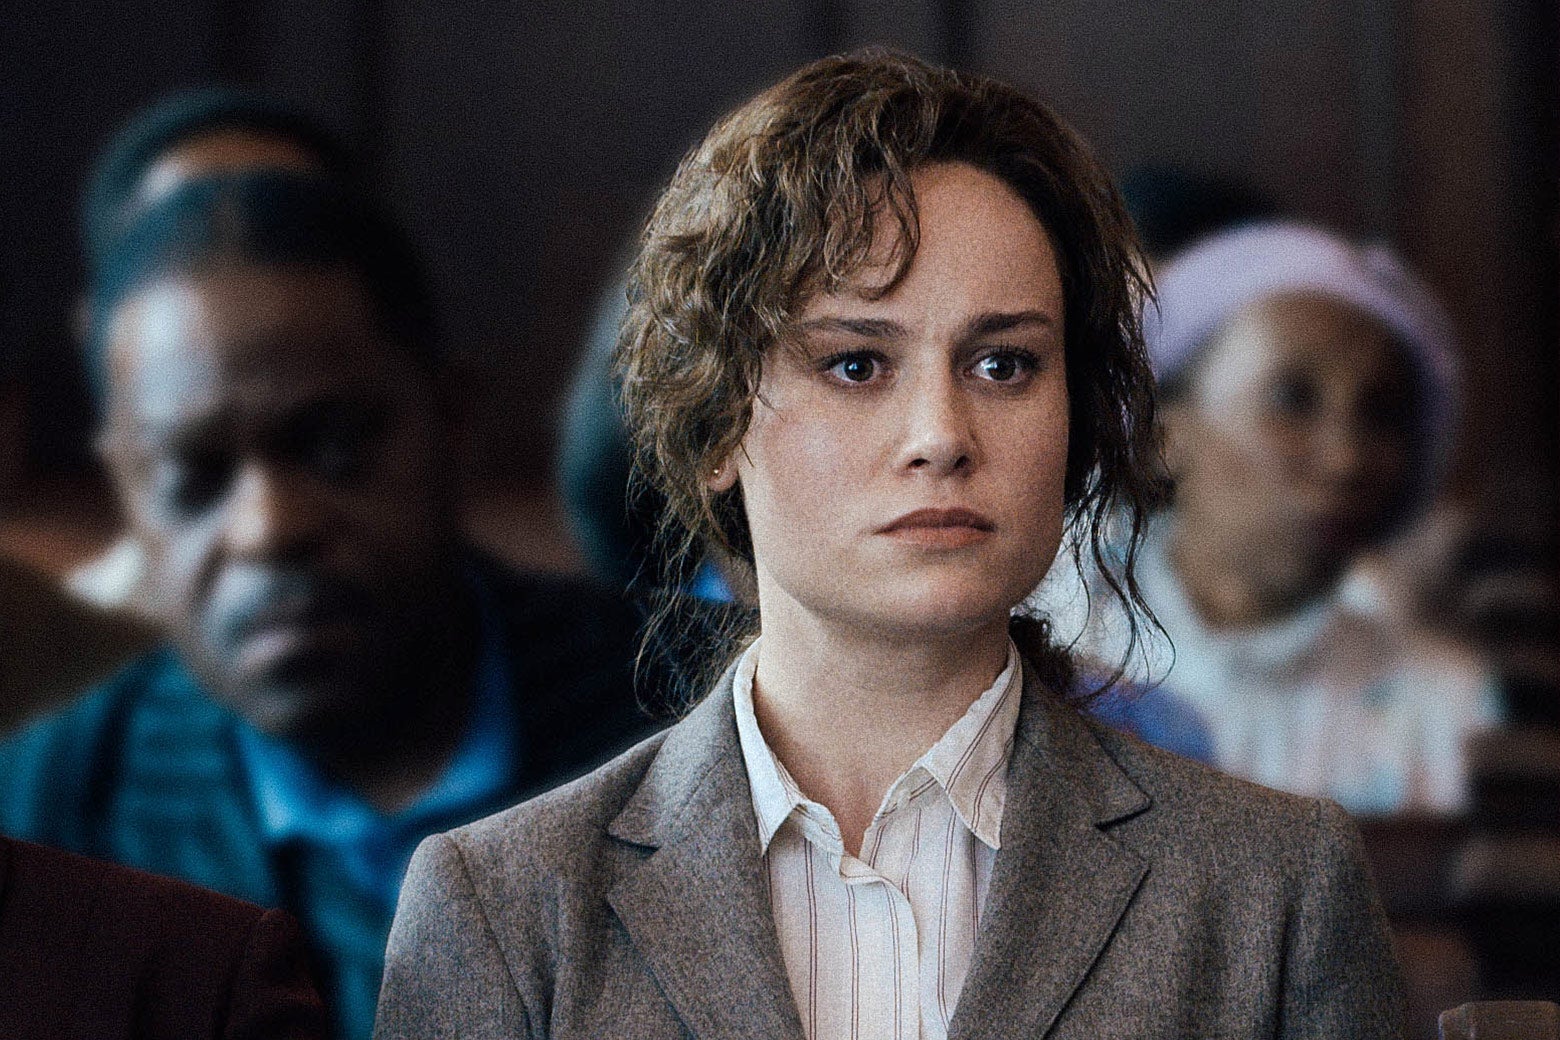 Brie Larson staring intensely with curls of hair dripping down her face